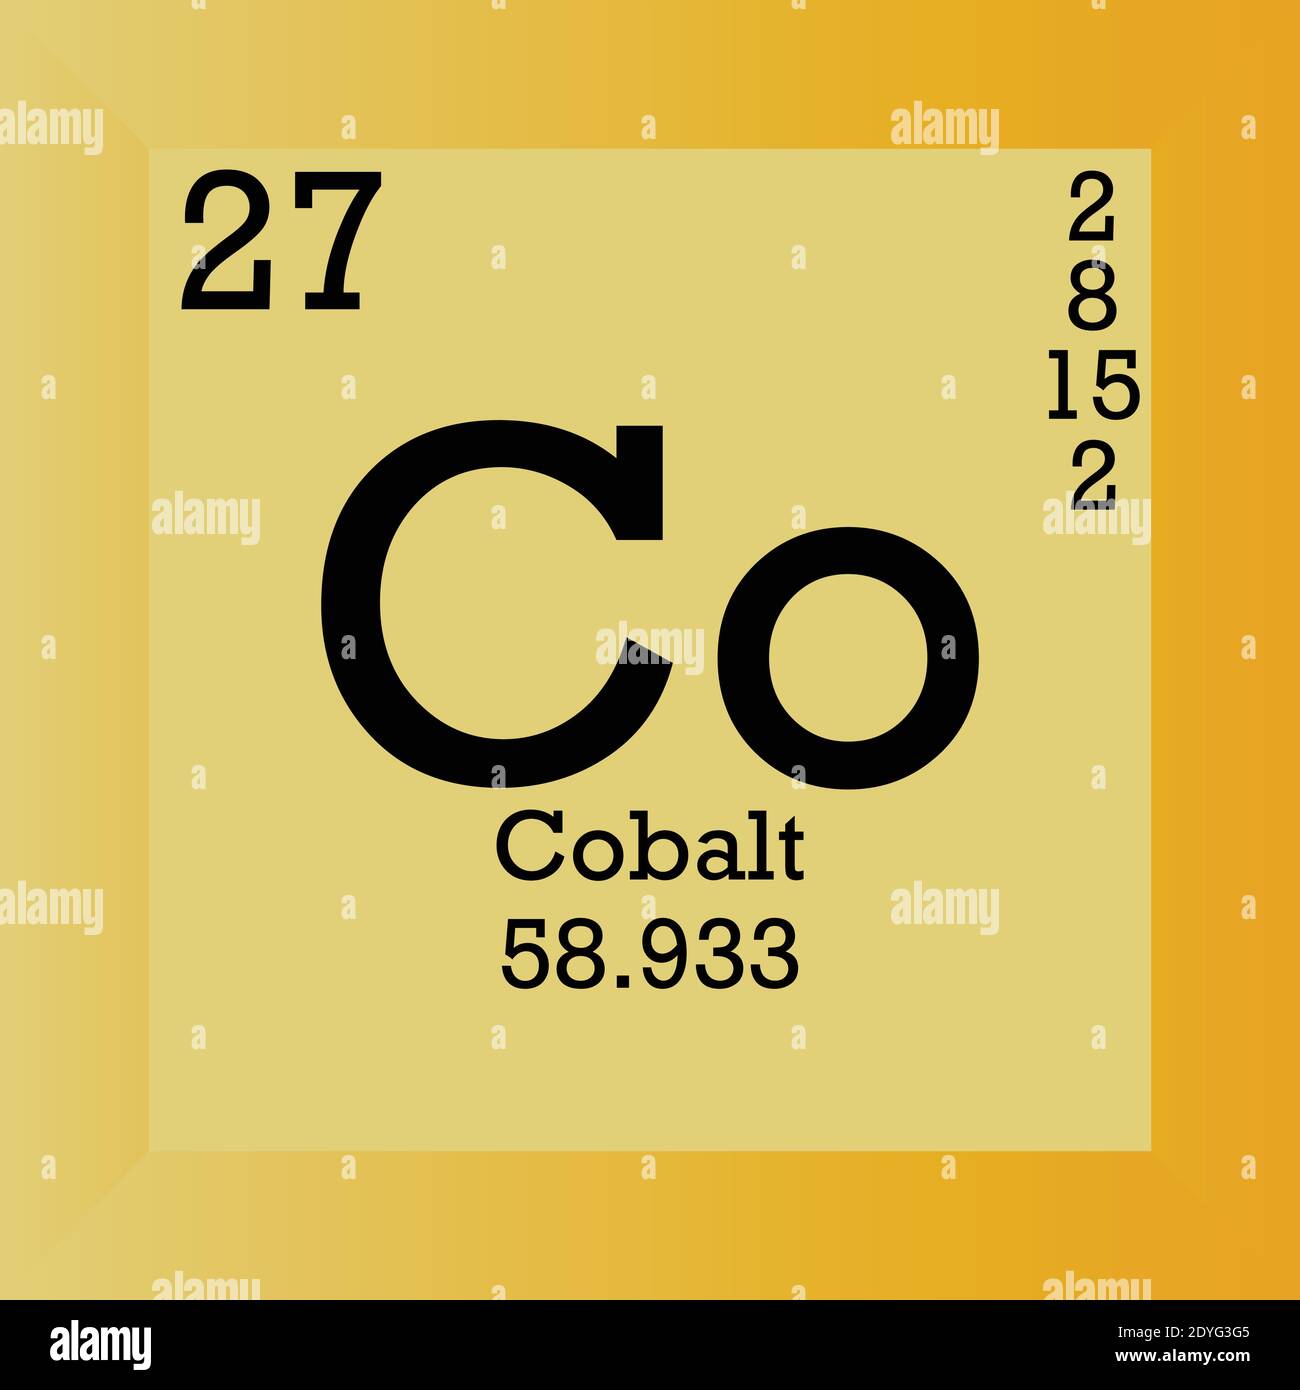 Co Cobalt Chemical Element Periodic Table. Single vector illustration, element icon with molar mass, atomic number and electron conf. Stock Vector